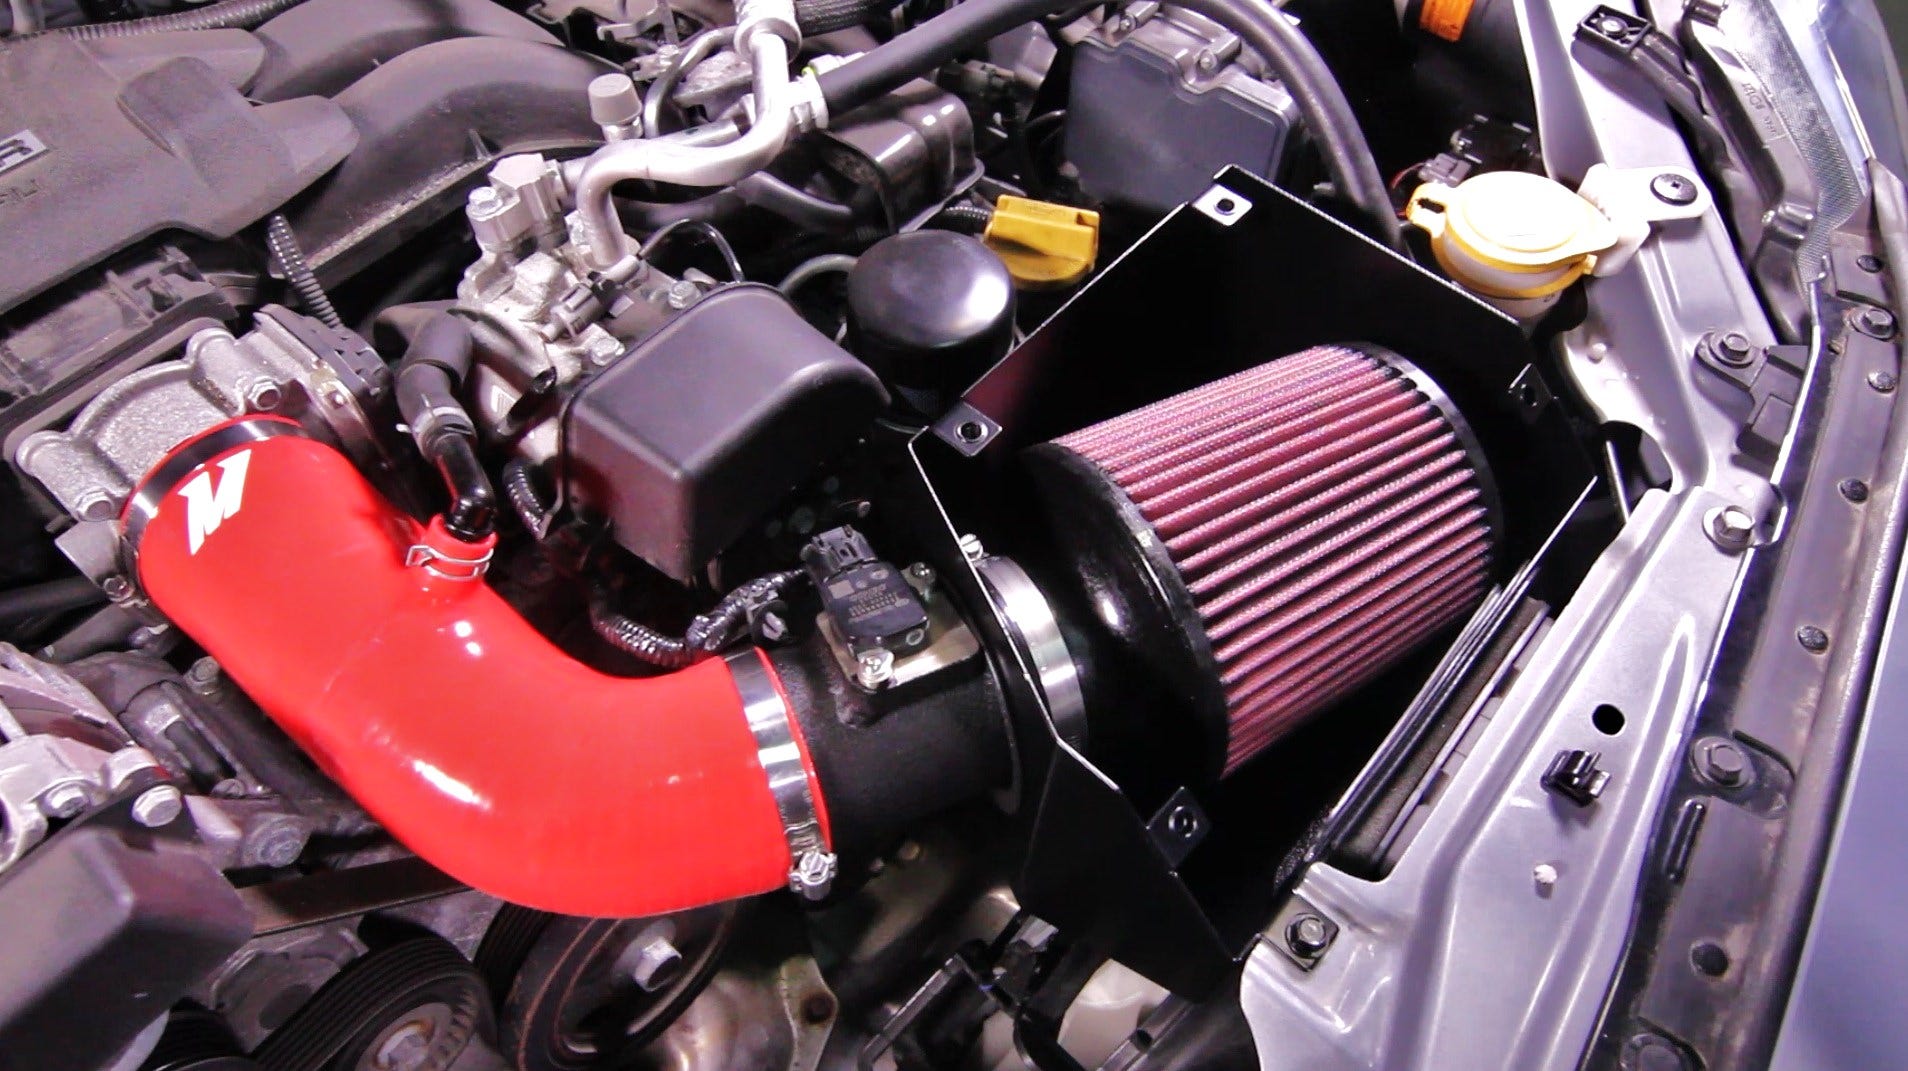 A new Mishimoto BRZ/FR-S Intake, Part 3: Product Testing and Final Product